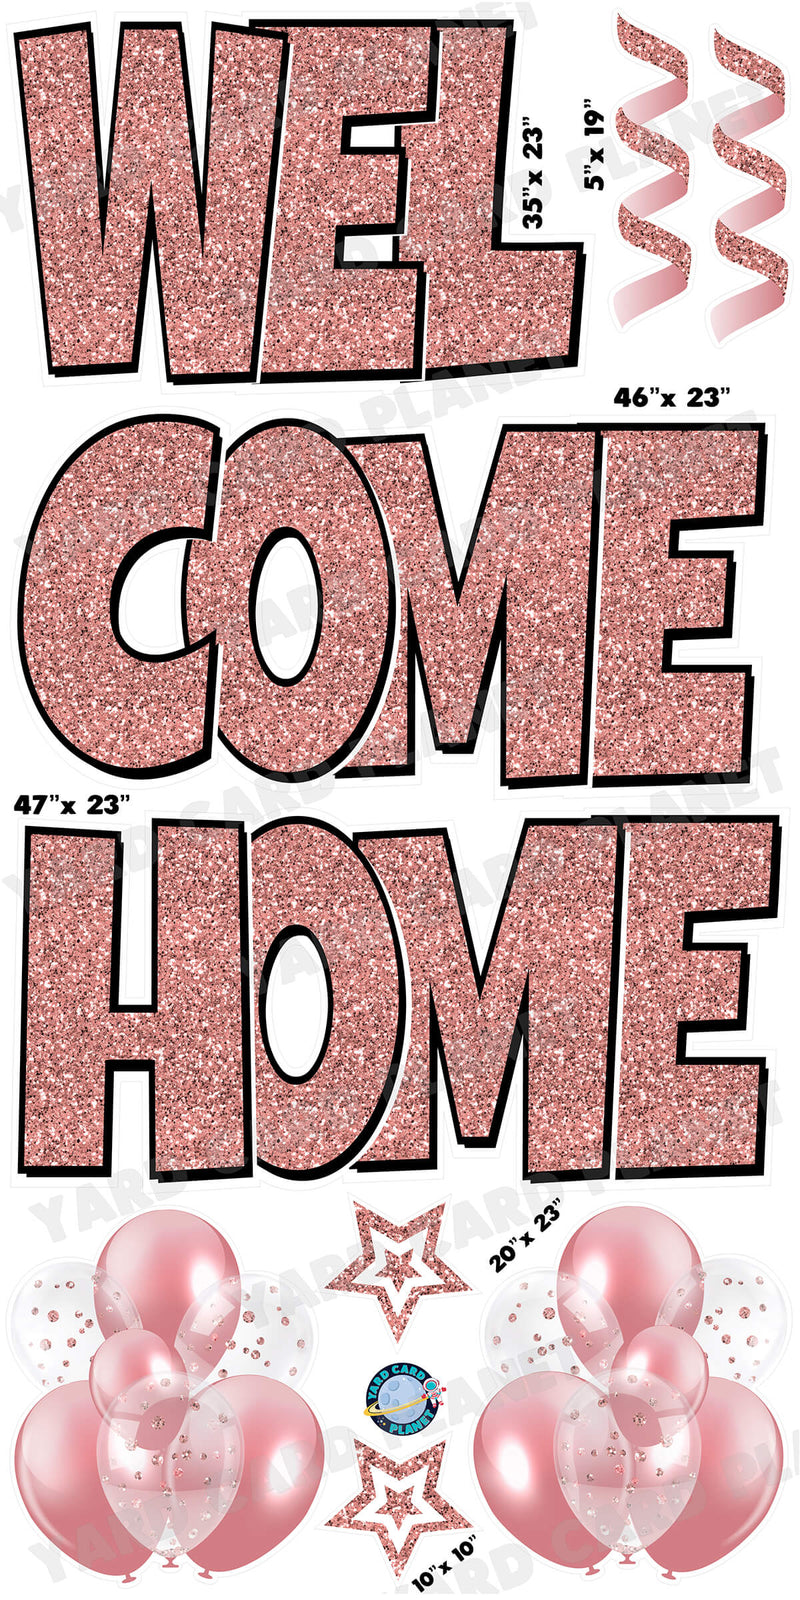 Large 23" Welcome Home Yard Card EZ Quick Sets in Luckiest Guy Font and Flair in Rose Gold Glitter Pattern